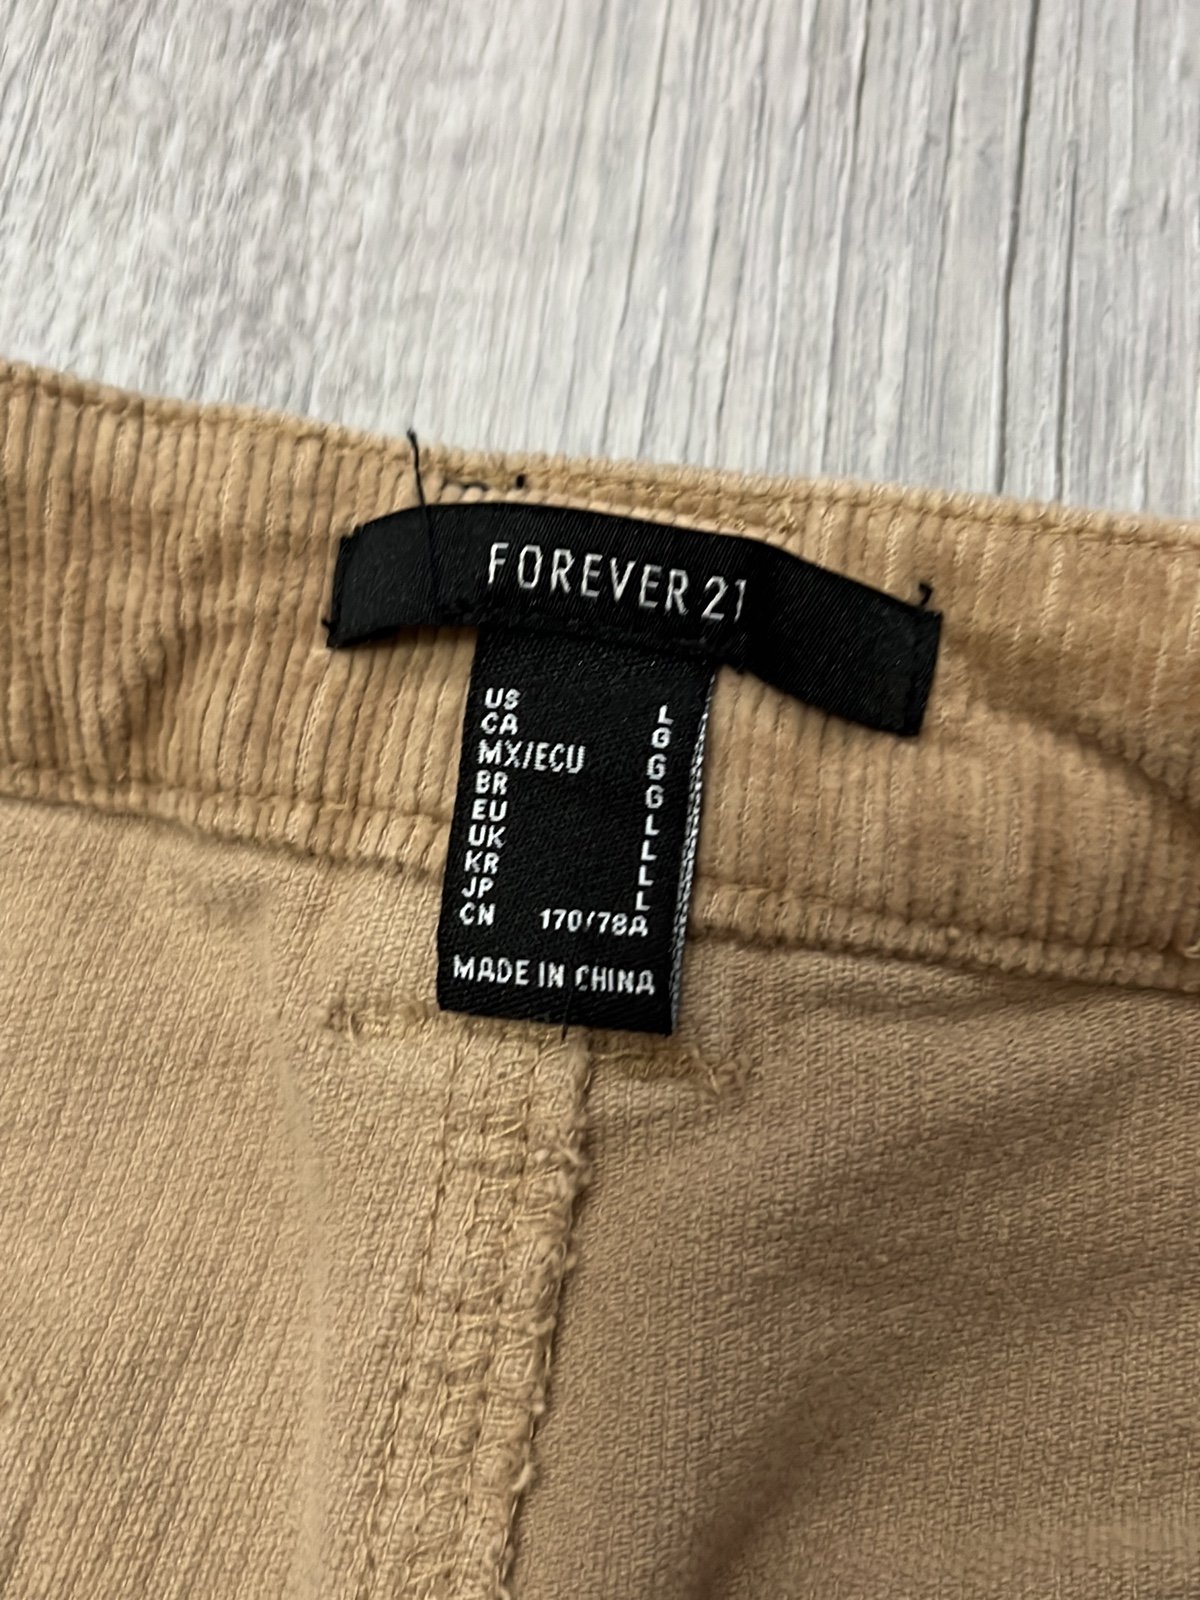 save up to 70% forever 21 bootcut/flare pants G0E5nz2Bp Cool